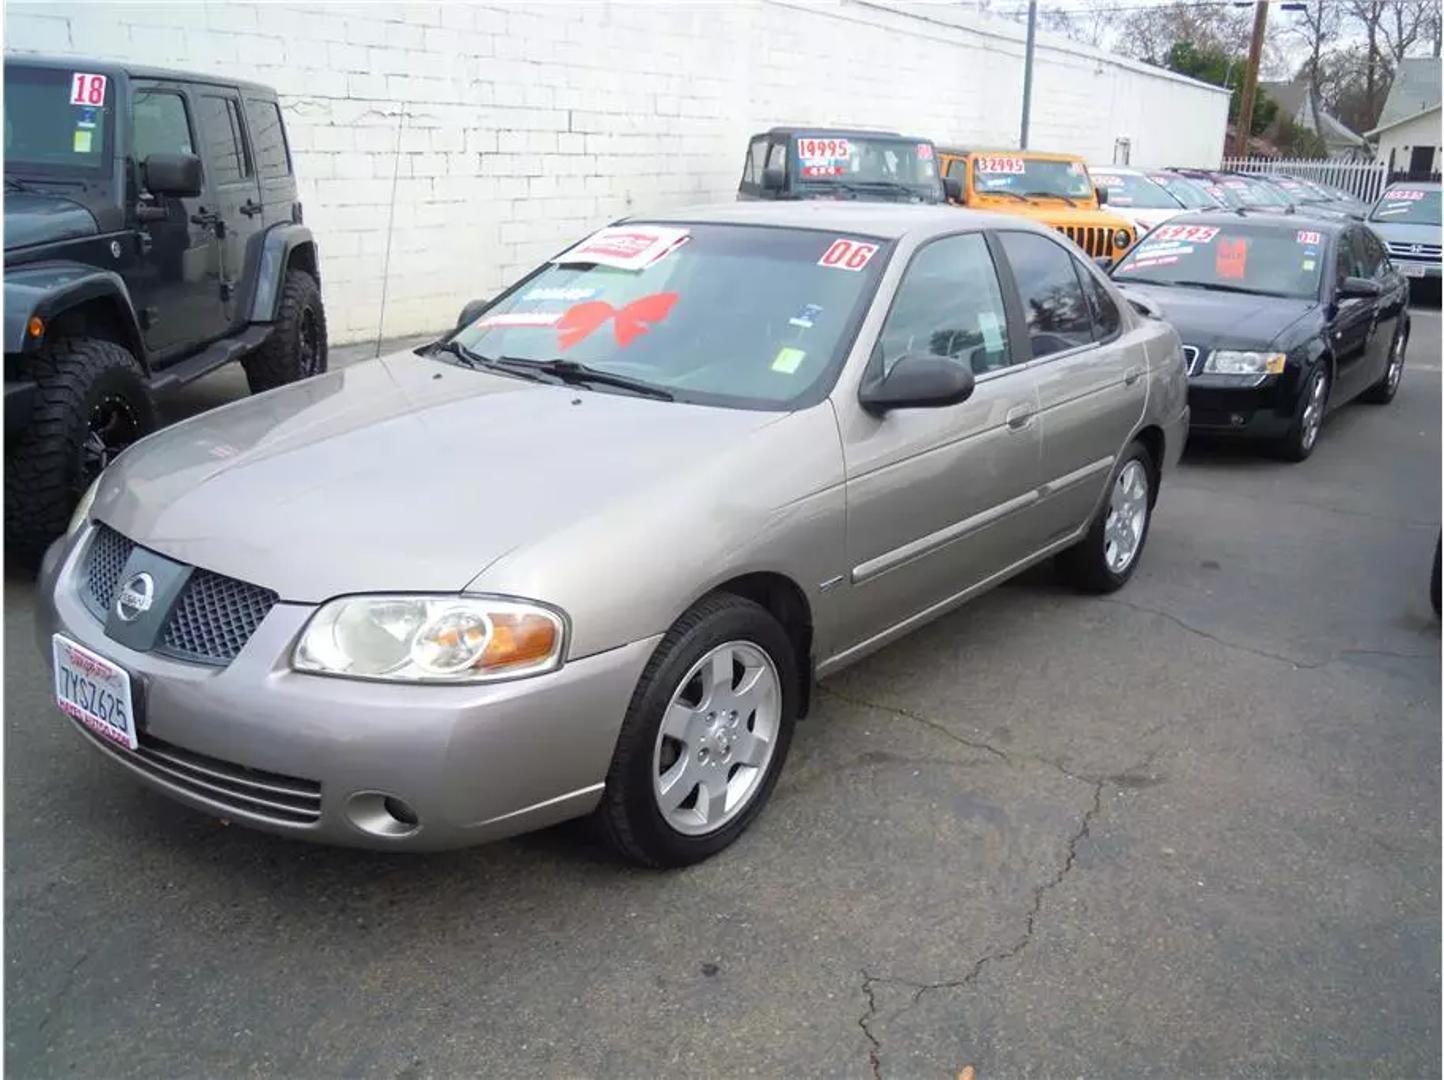 Used 2006 Nissan Sentra 1.8 S with VIN 3N1CB51D06L546558 for sale in Roseville, CA